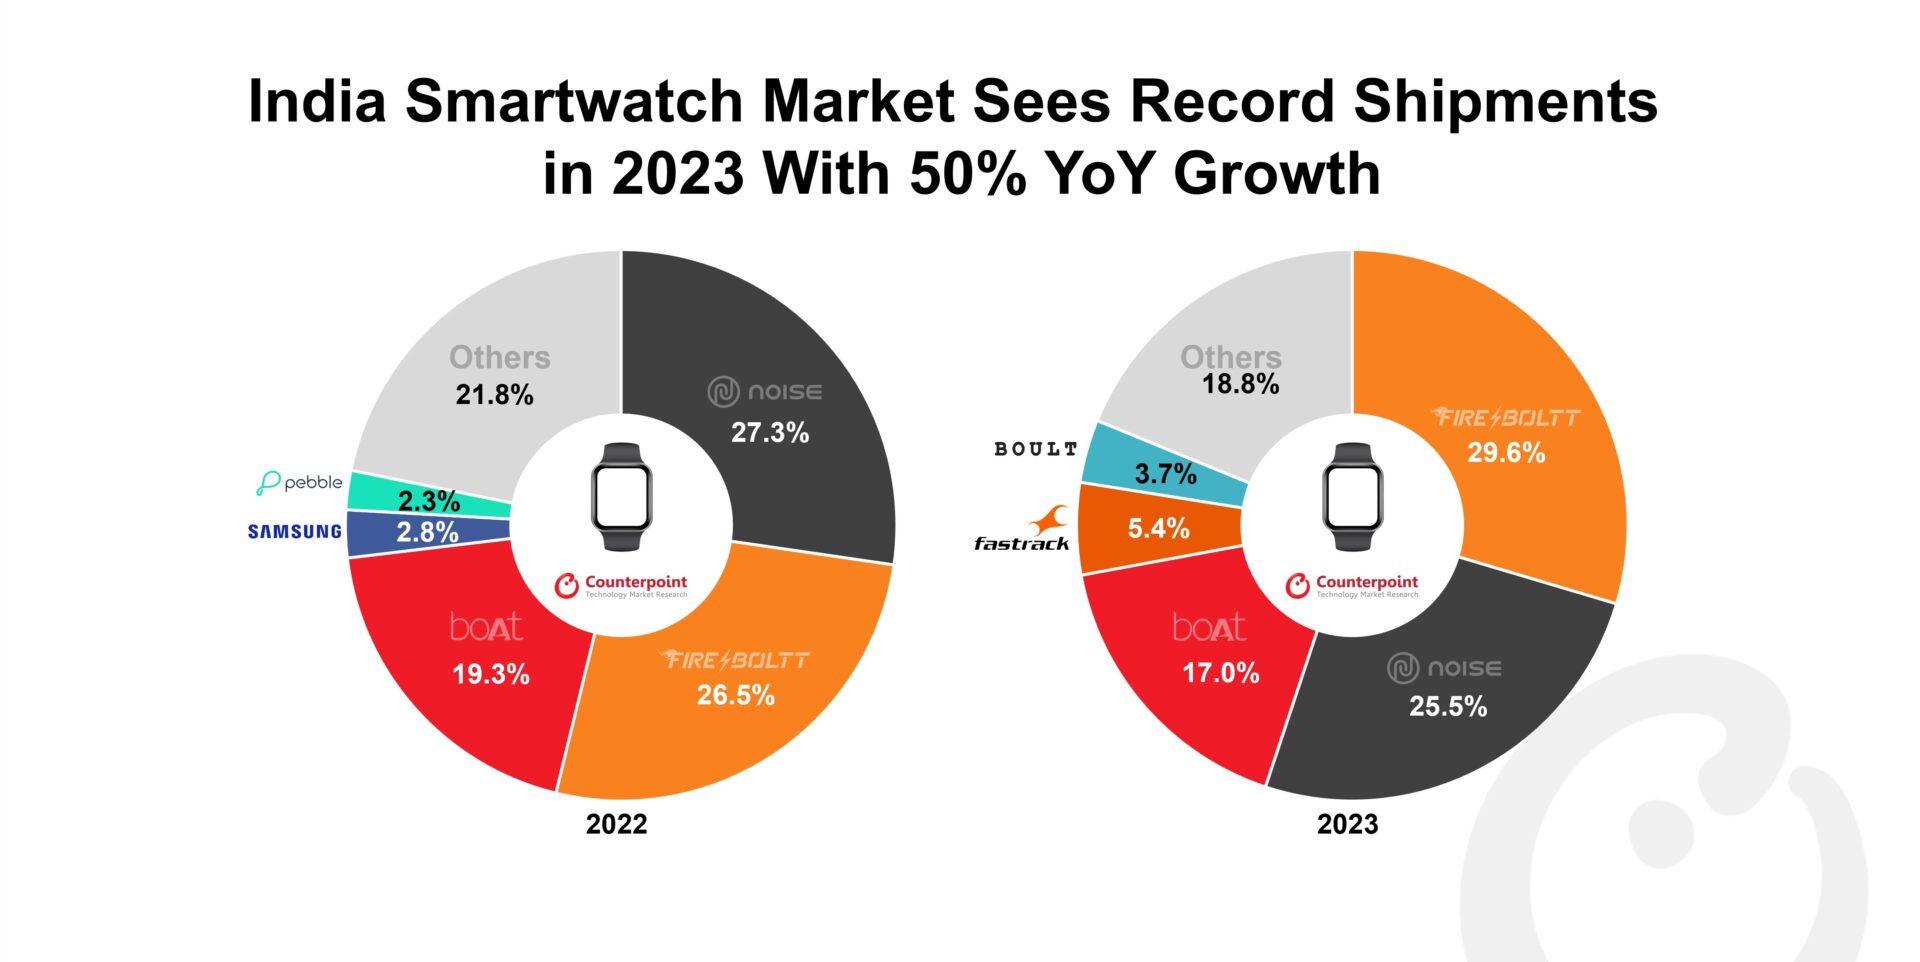 A chart showing India Smartwatch Market Share 2022 vs 2023